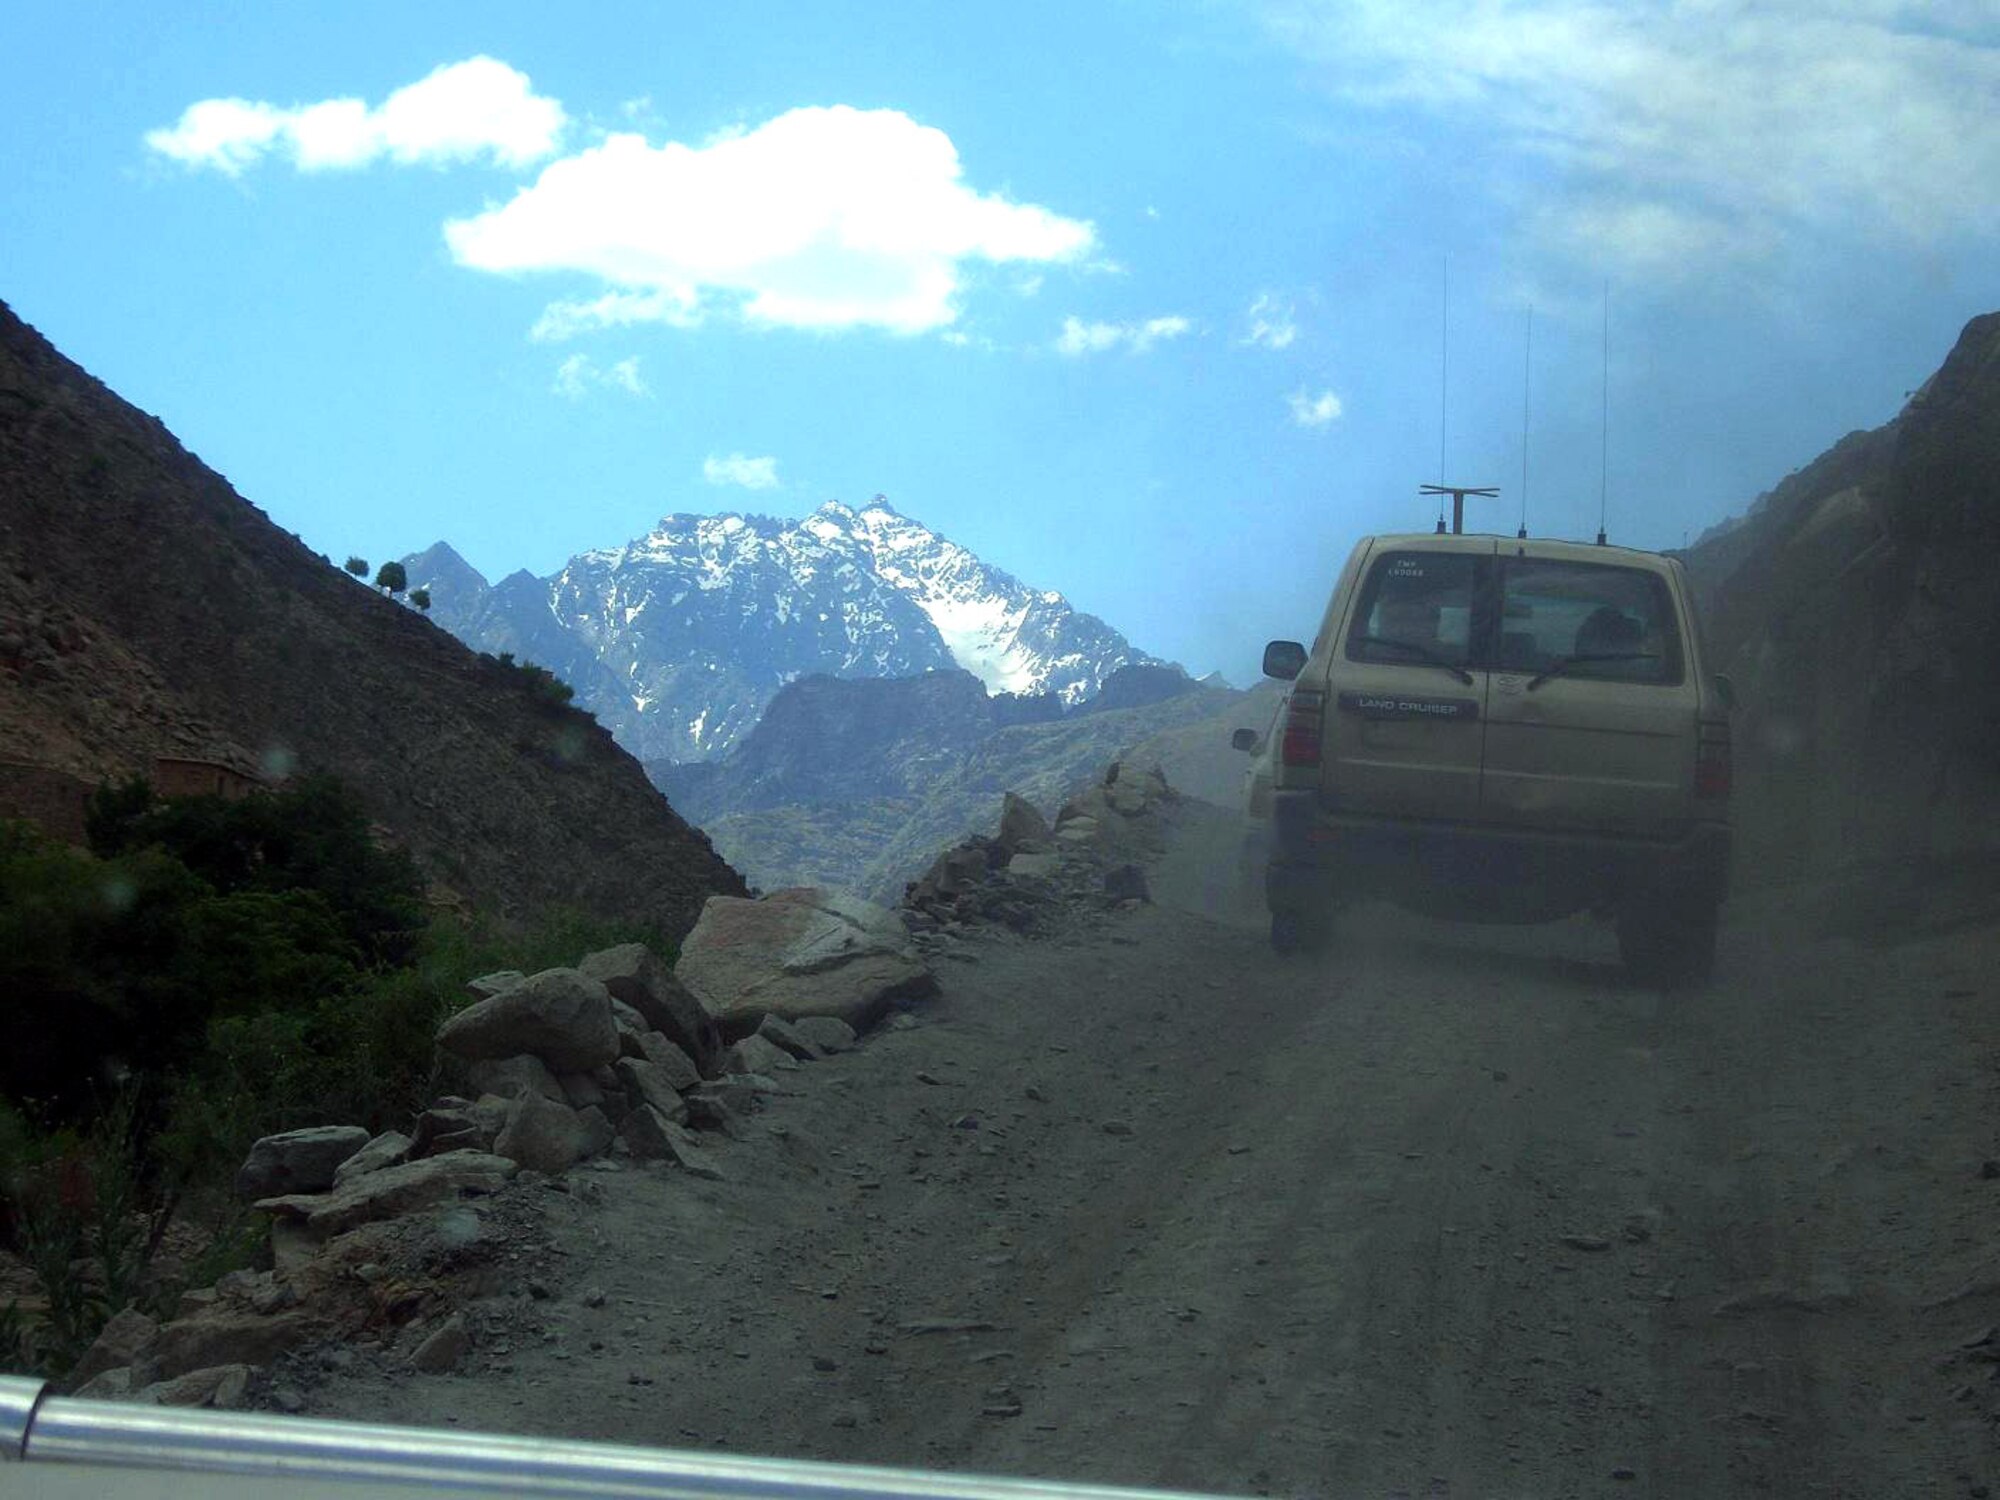 A multi-service supply convoy loaded with humanitarian assistance supplies makes its way up a narrow road in the Panjshir Province, Afghanistan, on Monday, June 12. The convoy delivered the supplies to the village of Dara, located at approximately 8,000 feet above sea level. (Courtesy photo/Marine Col. Steve Hasty)

